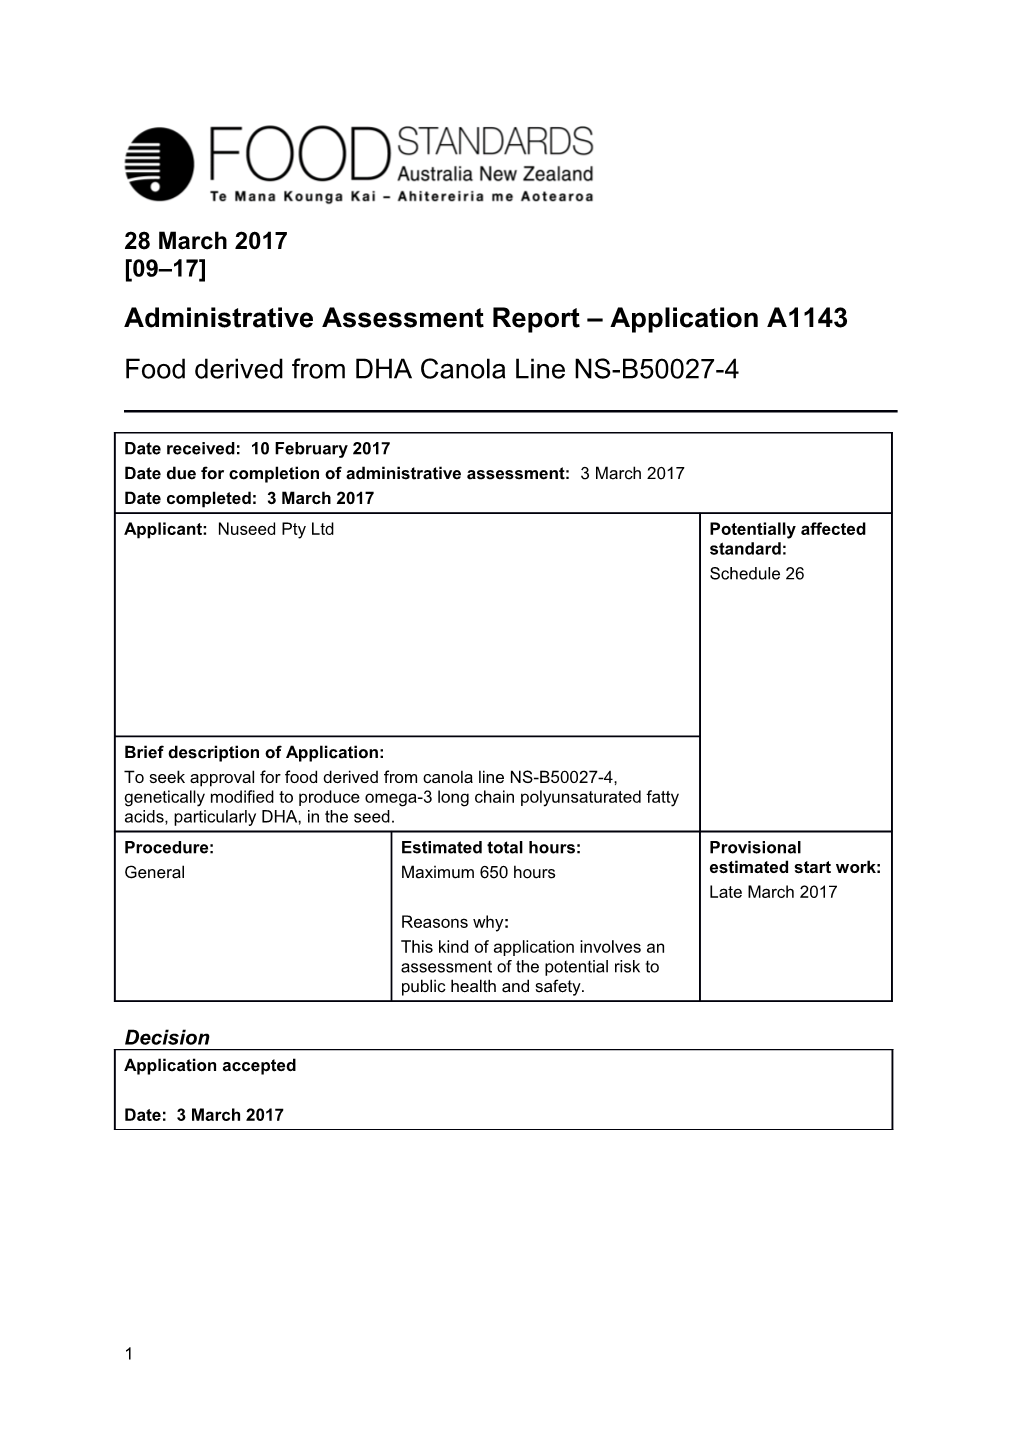 Administrative Assessment Report Application A1143